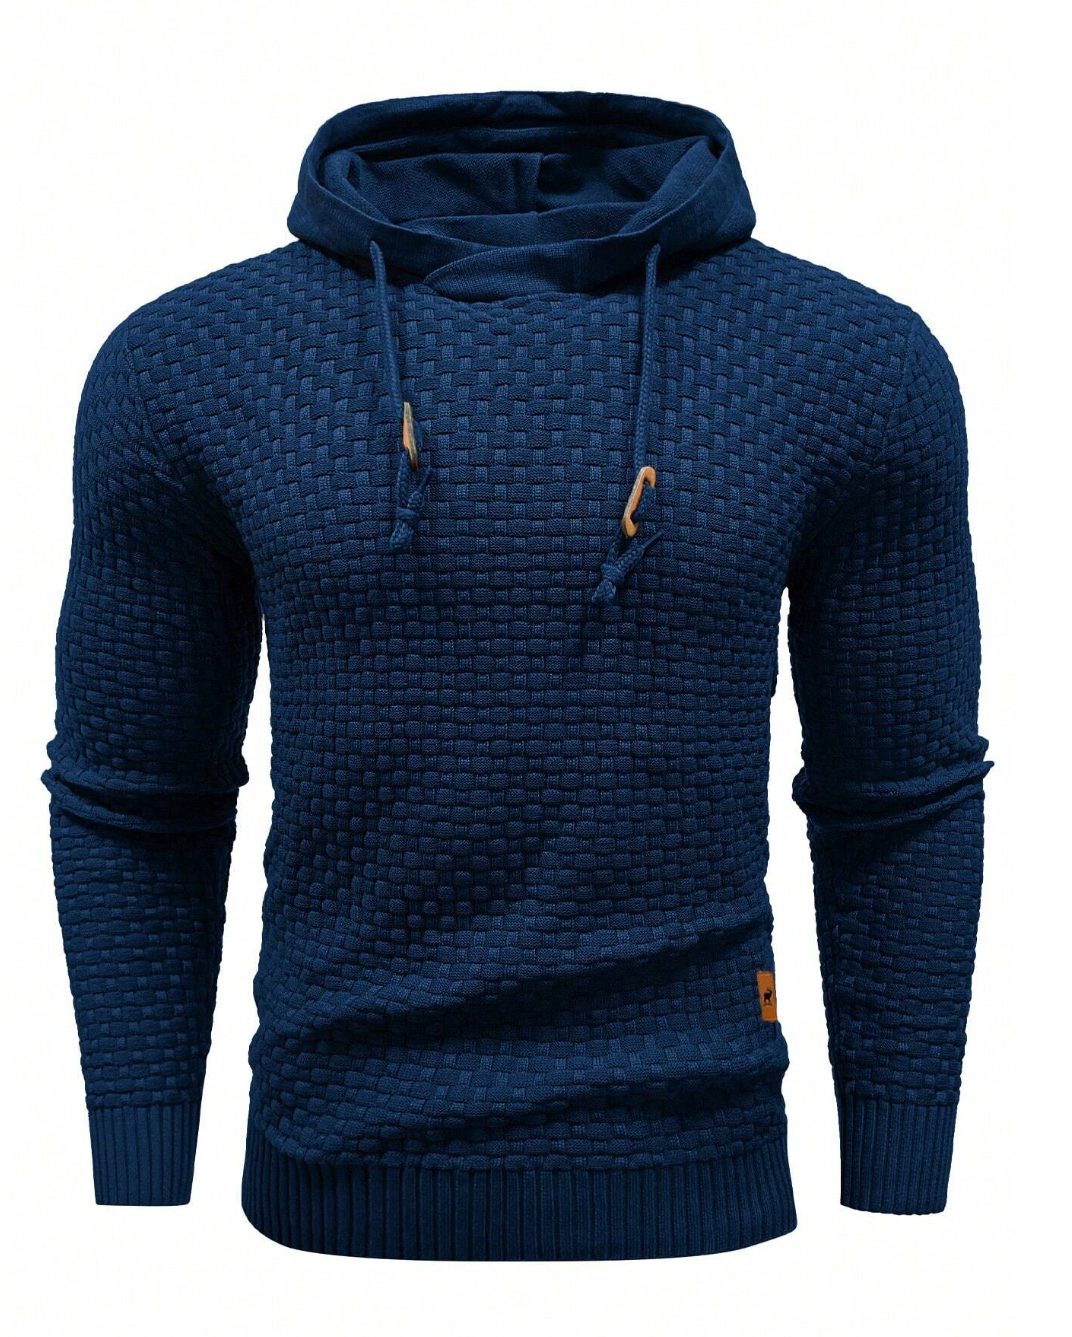 Urban Edge: Manfinity Homme Men's Patch Detail Hooded Sweater